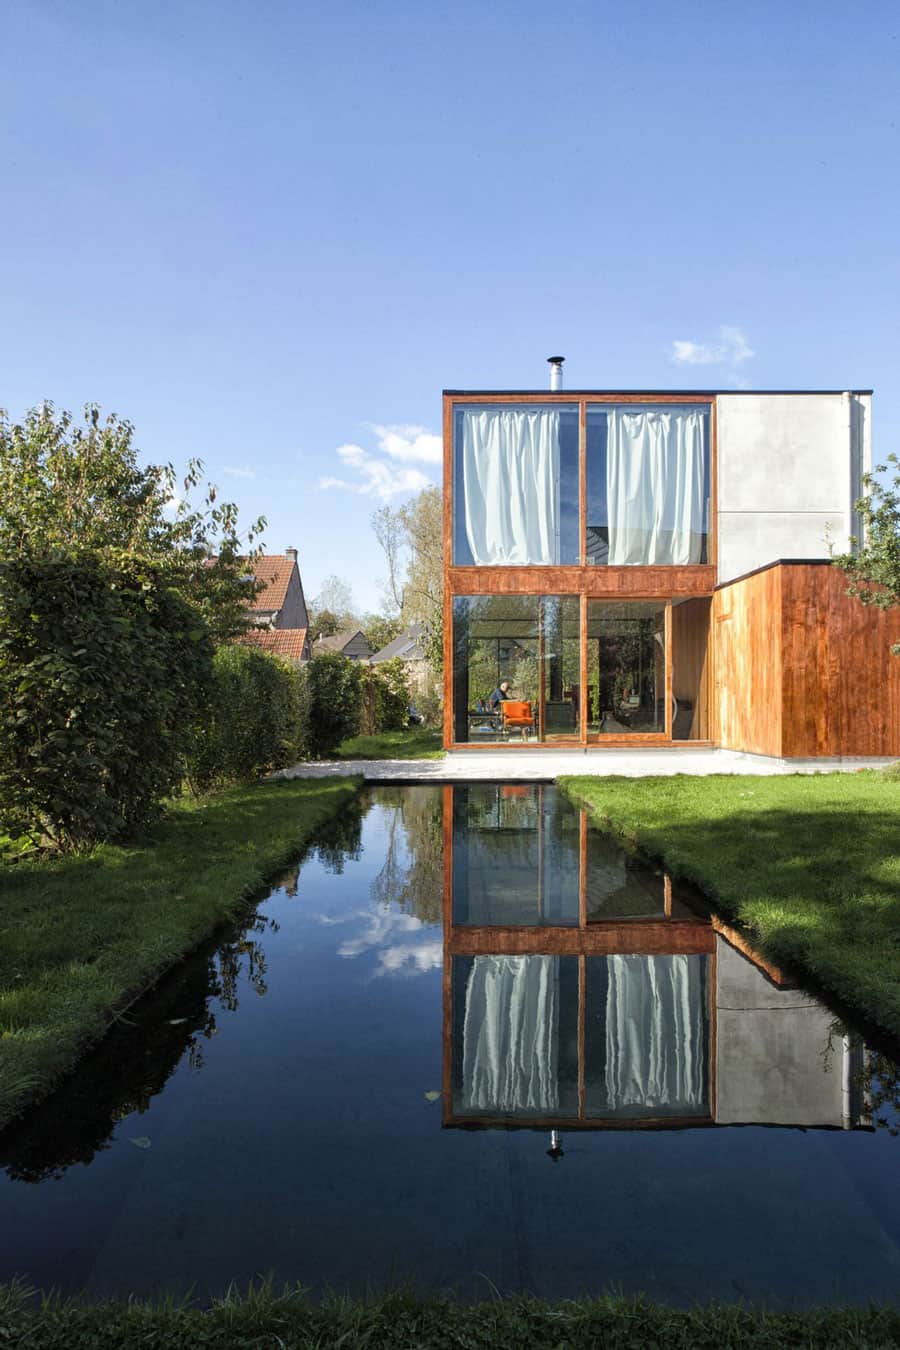 Smart Material Choices Blend This Home Into Its Surroundings